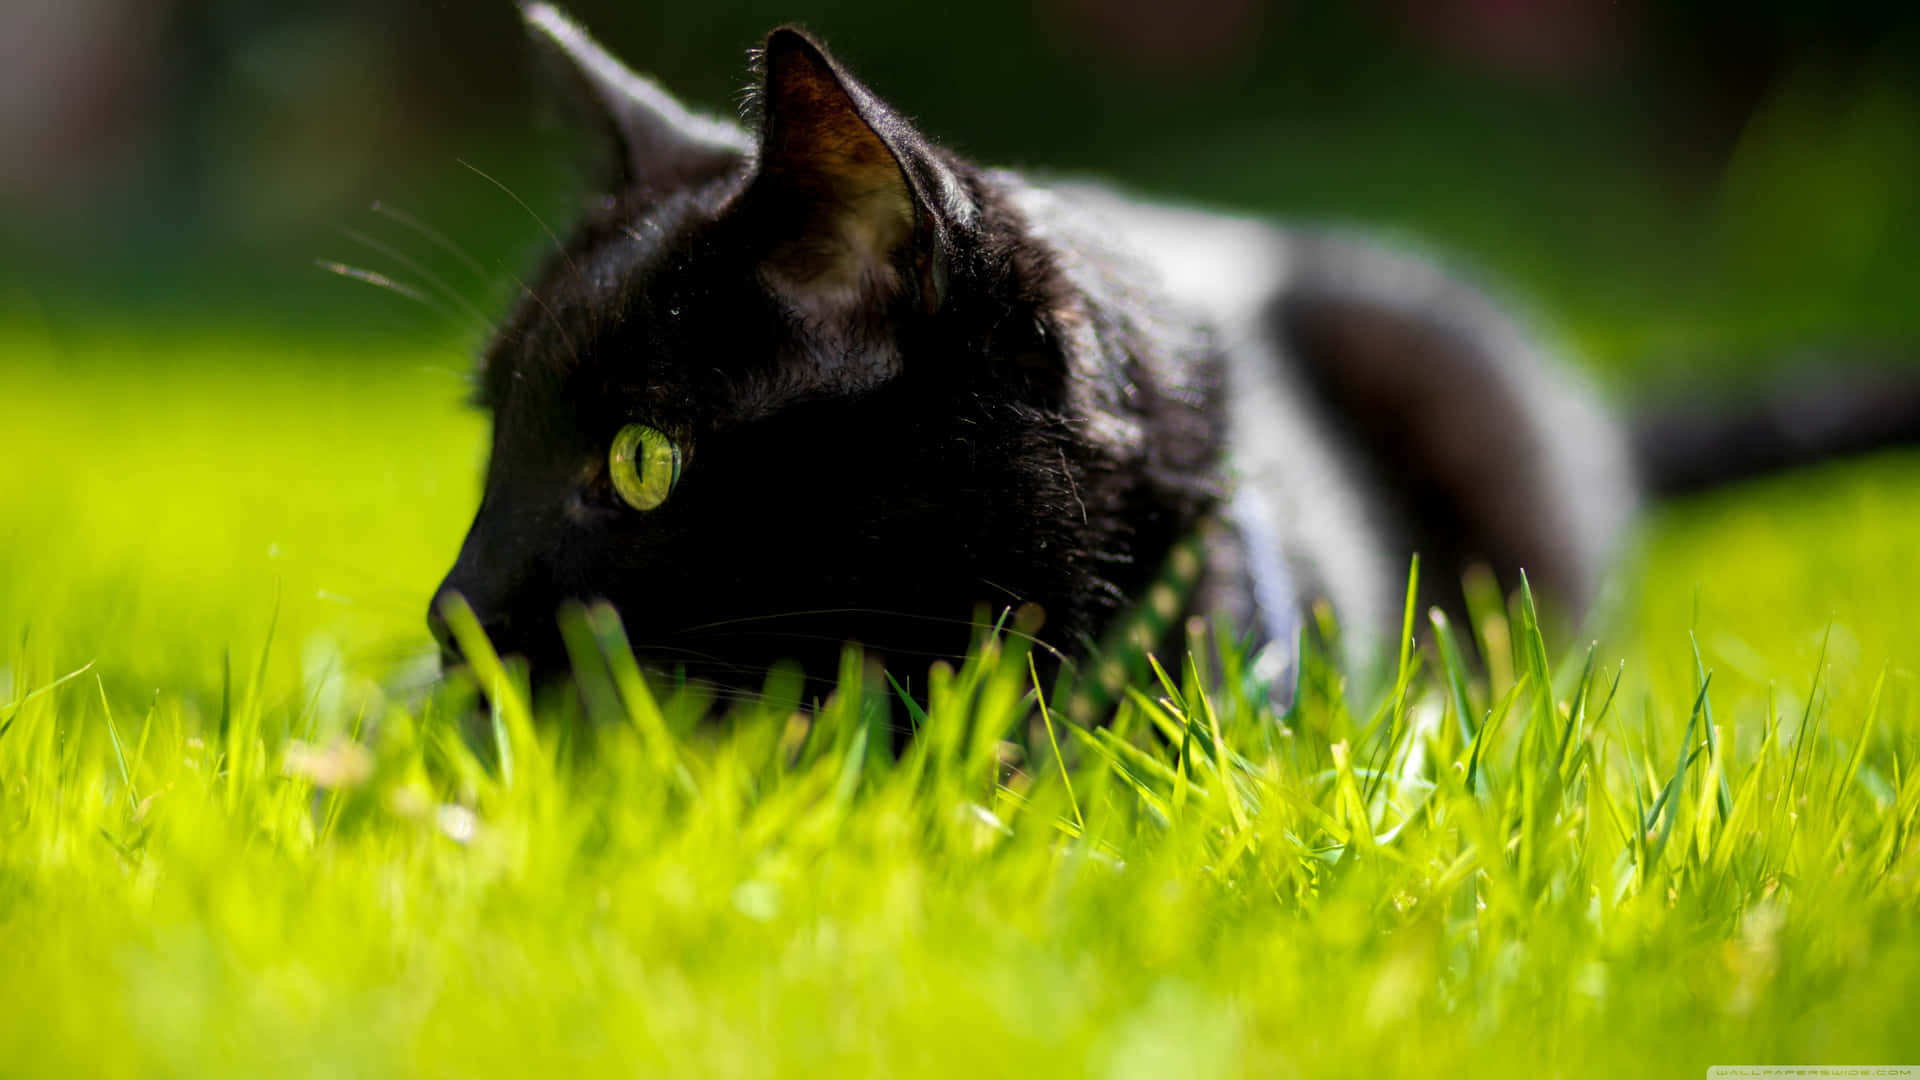 Black Cat With Green Eyes On Grass Wallpaper